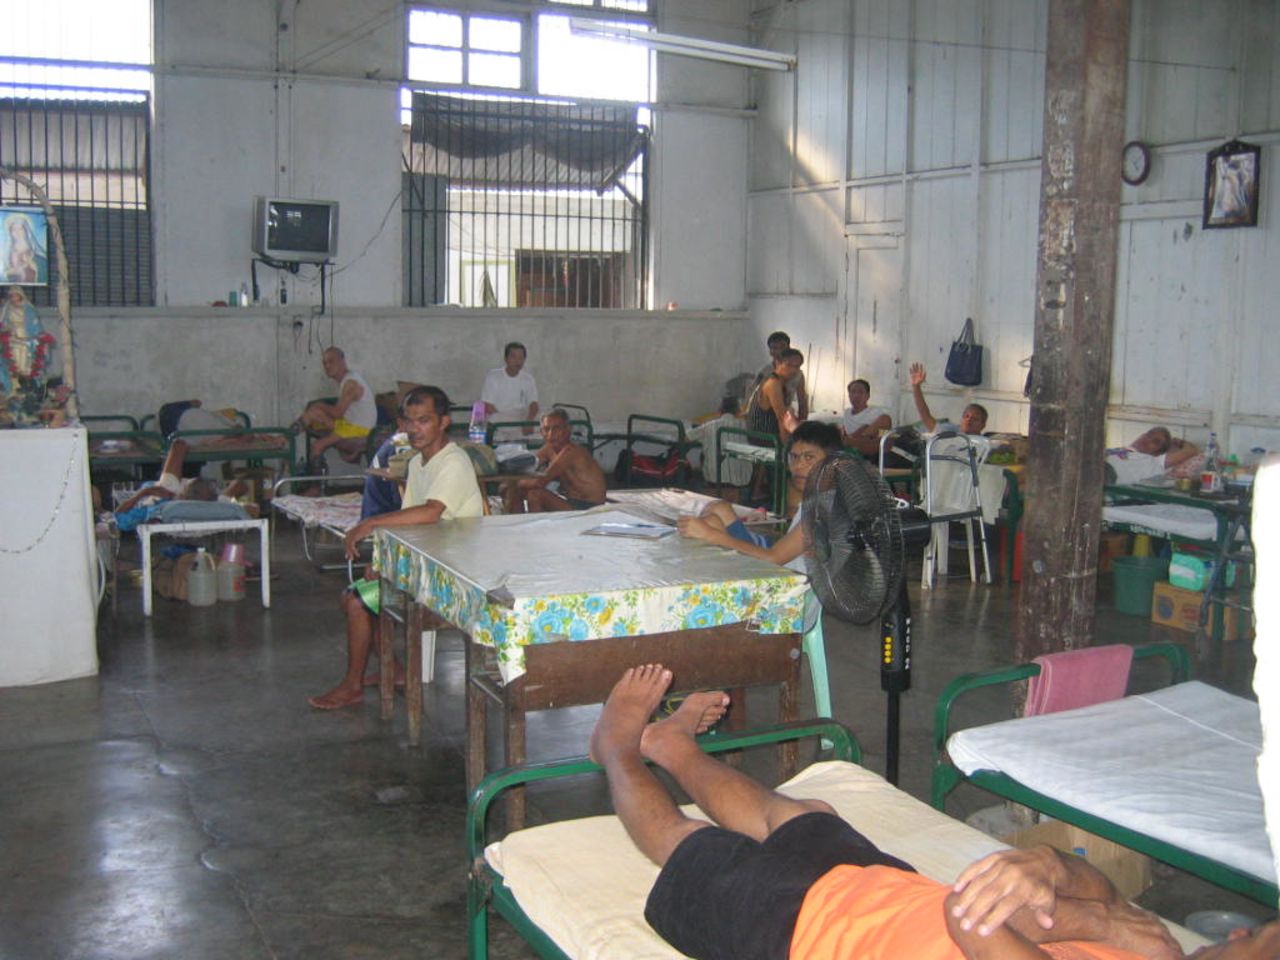 The Philippines government is trying to modernize the country's prisons and plans to build a new maximum security facility to ease congestion. Here, inmate medical "trustees" take care of sick and mentally ill inmates in the prison hospital.